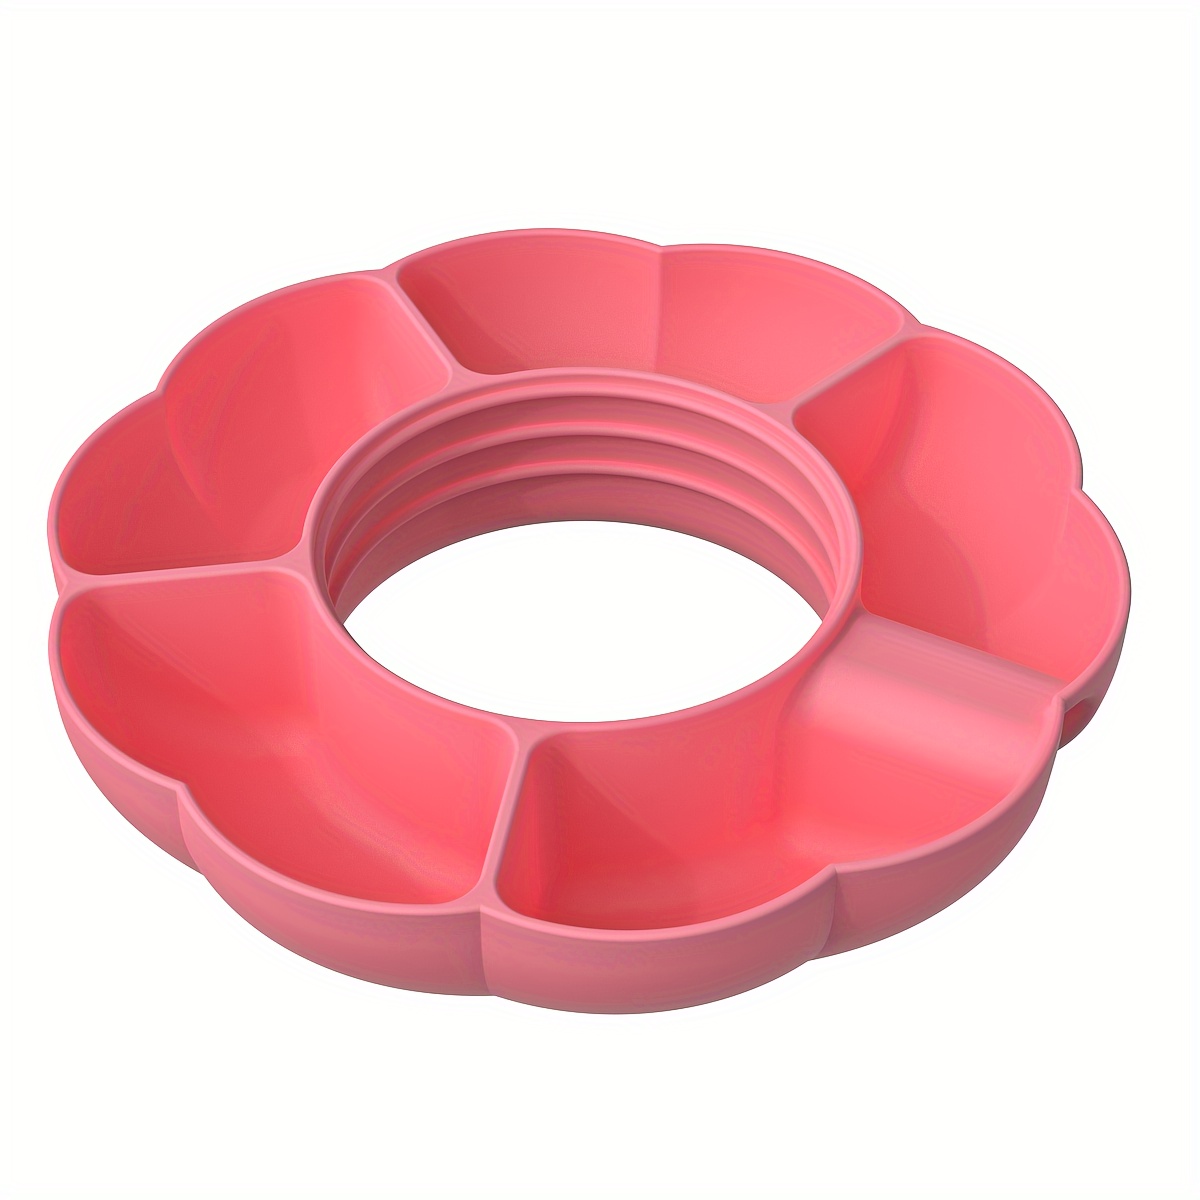  Snack Bowl for Stanley 30 oz Tumbler with Handle Reusable  Silicone Snack Tray for Stanley Cup Holder Stanley Cup Accessories Silicone  Snack Ring Suitable for Car Cup Holder Cinema Home Outdoor(Pink) 